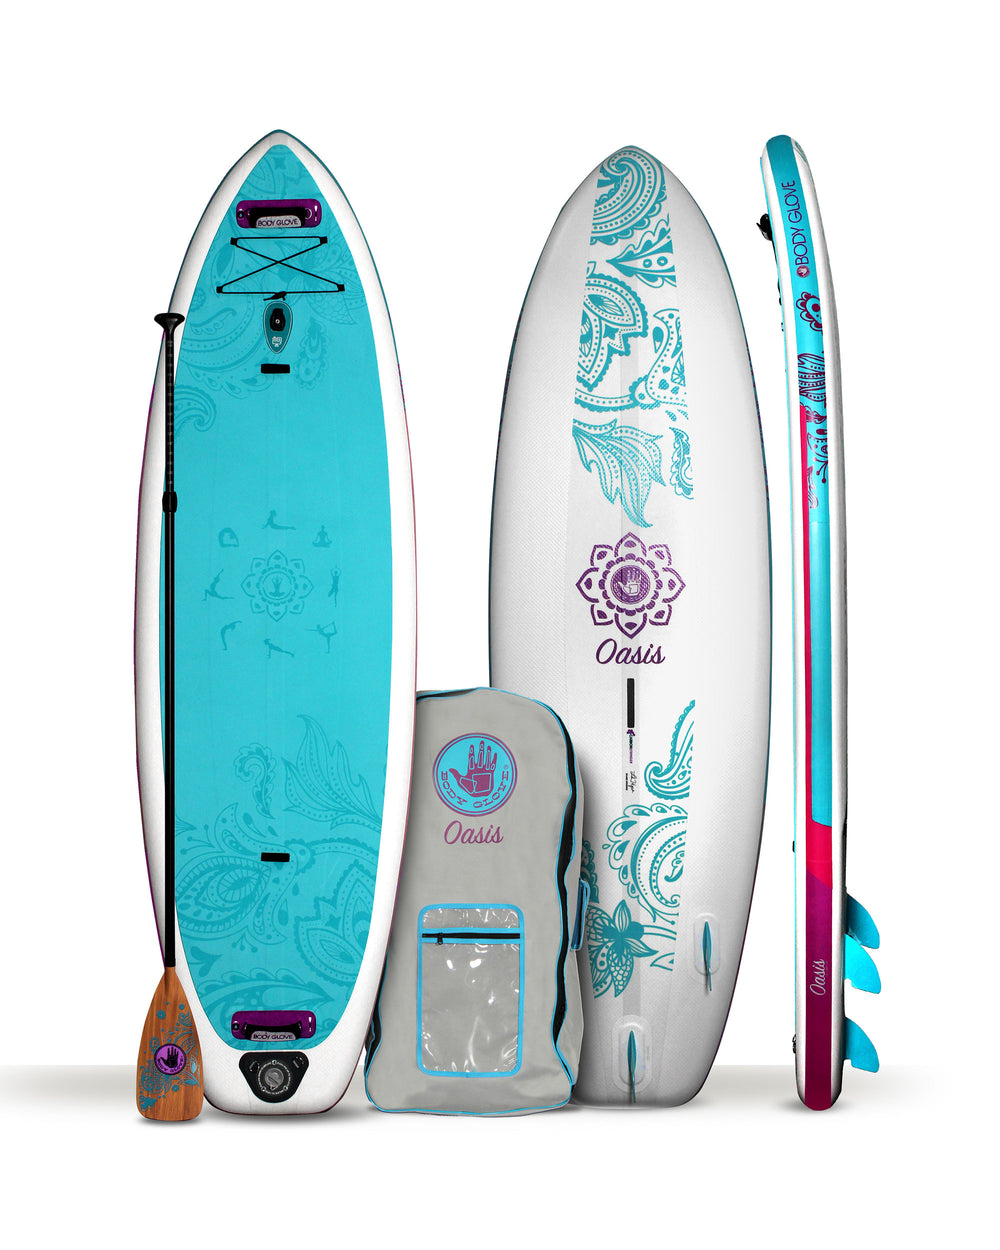 isupoasis21u-441___oasis-10-inflatable-stand-up-paddle-board-isup-with-accessories-teal-purple___front_1000x.jpeg